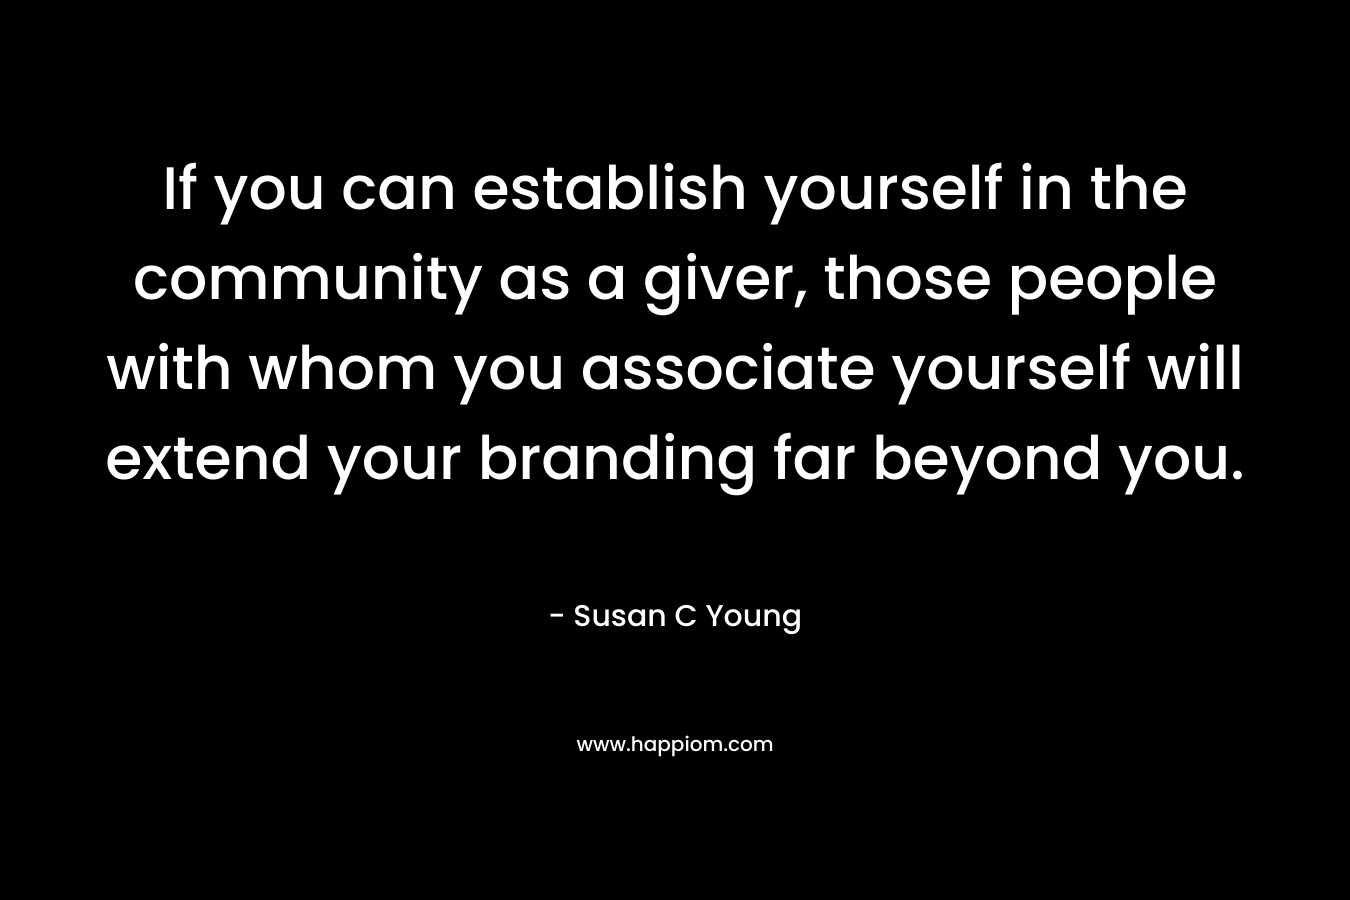 If you can establish yourself in the community as a giver, those people with whom you associate yourself will extend your branding far beyond you. – Susan C Young